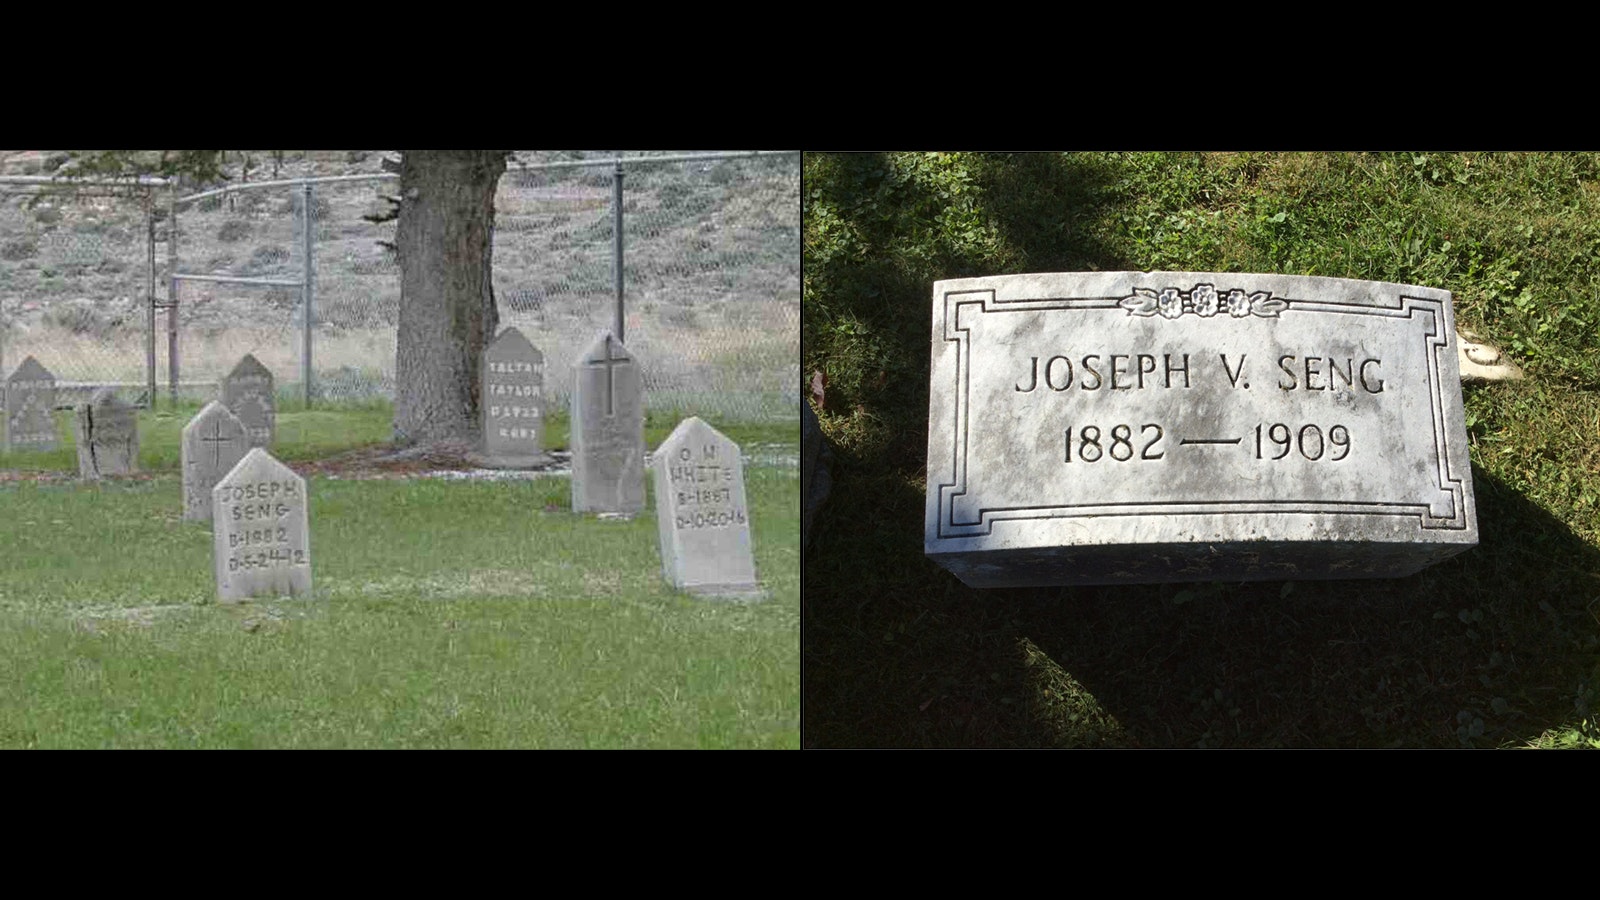 Joseph Seng's headstone at the Wyoming State Prison in Rawlins, left. Another appears in Seng's hometown of Allentown, Pennsylvania with an incorrect date of death.